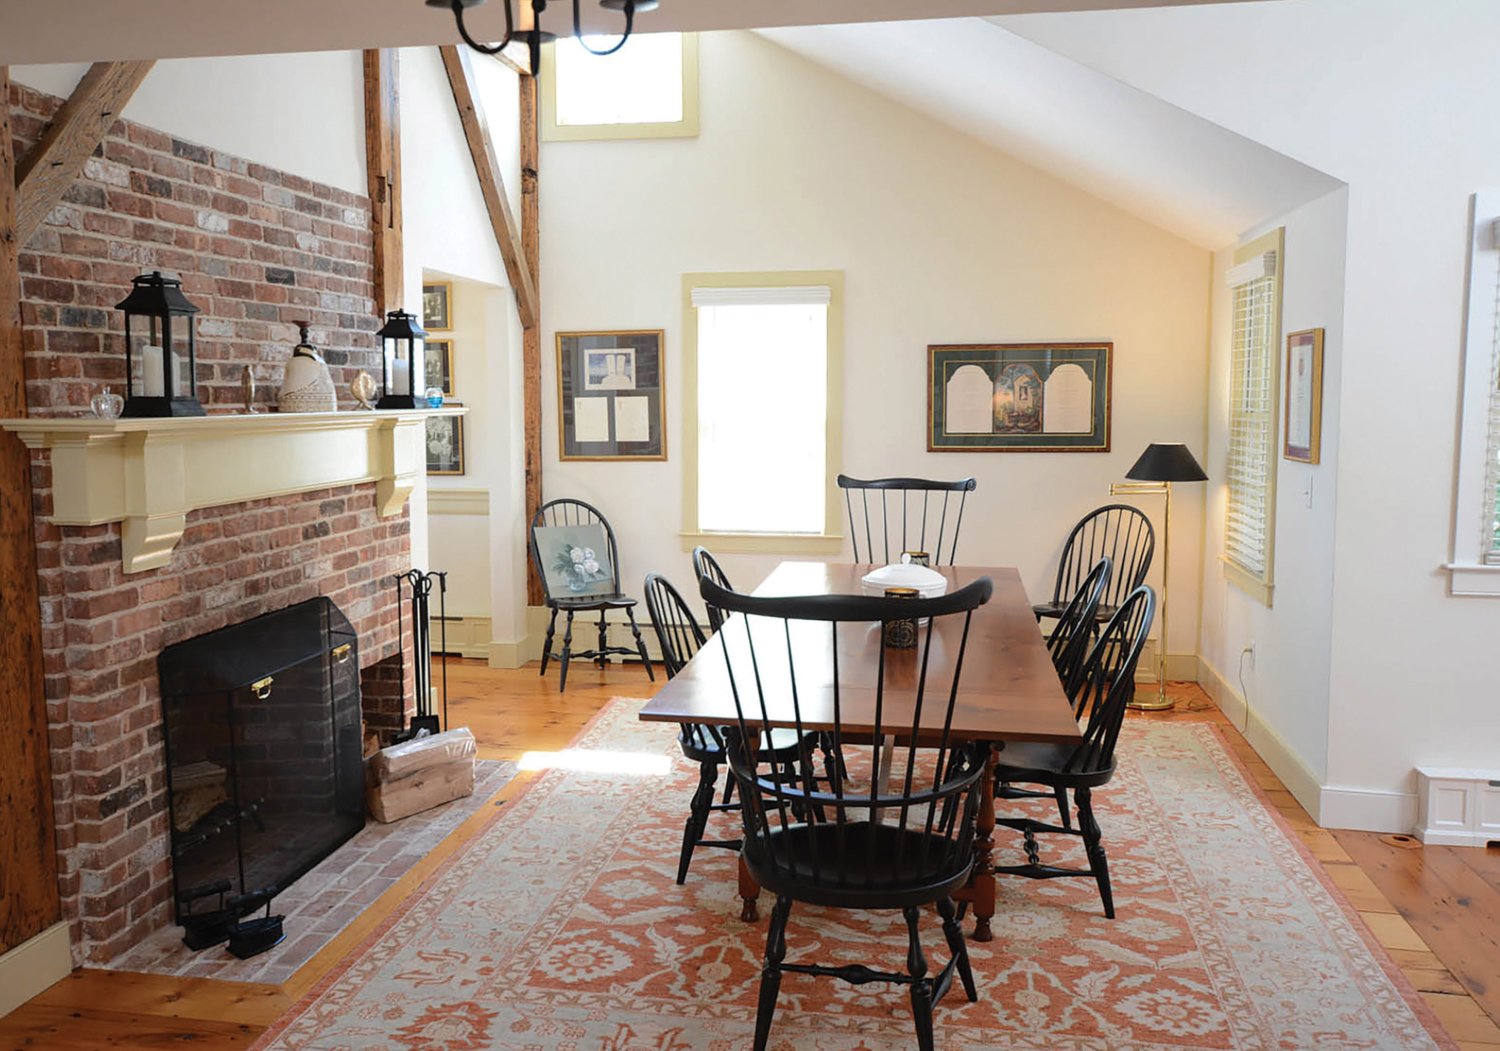 The dining room has a vaulted ceiling, wide pine floors, a brick fireplace with a brick hearth and exposed beams.